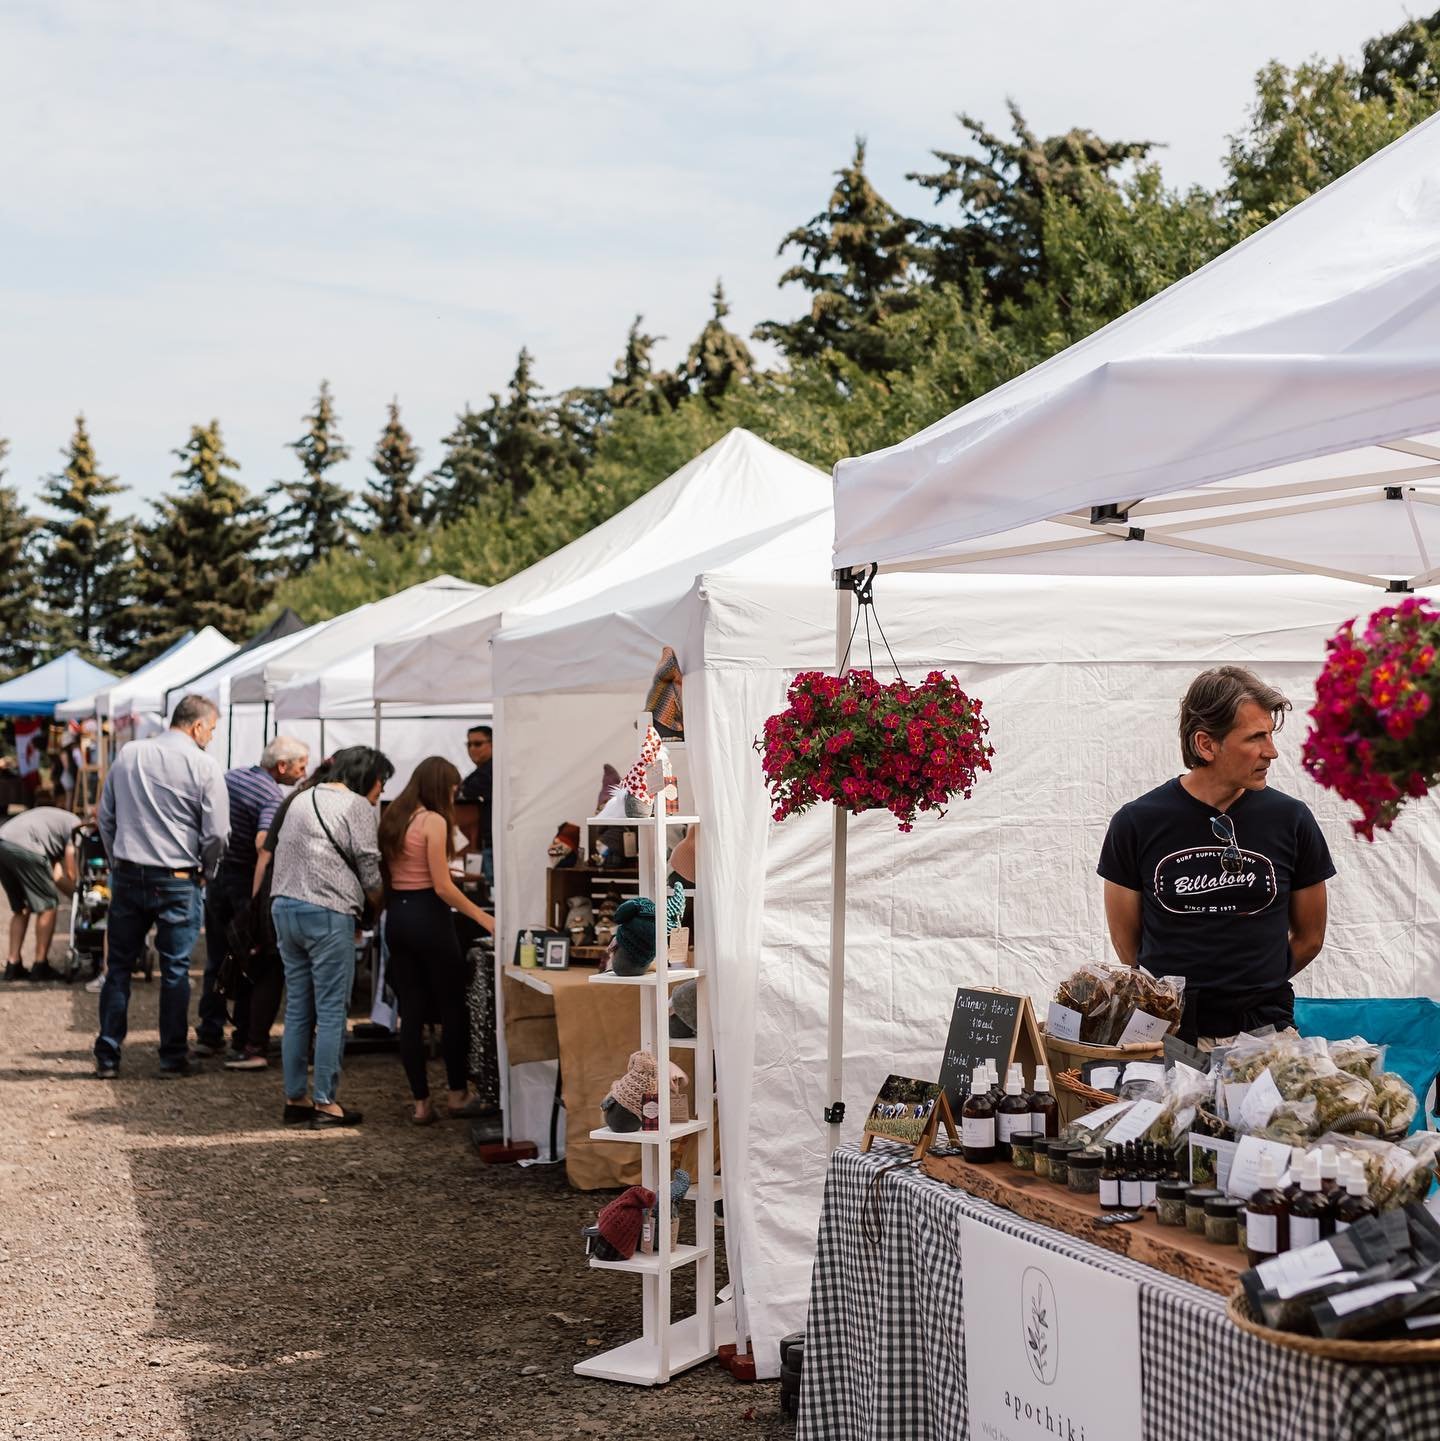 Attention Amazing Vendors!

Check out your inbox. We're so excited to announce we're hosting a 2nd season of Mini Markets at The Saskatoon Farm.